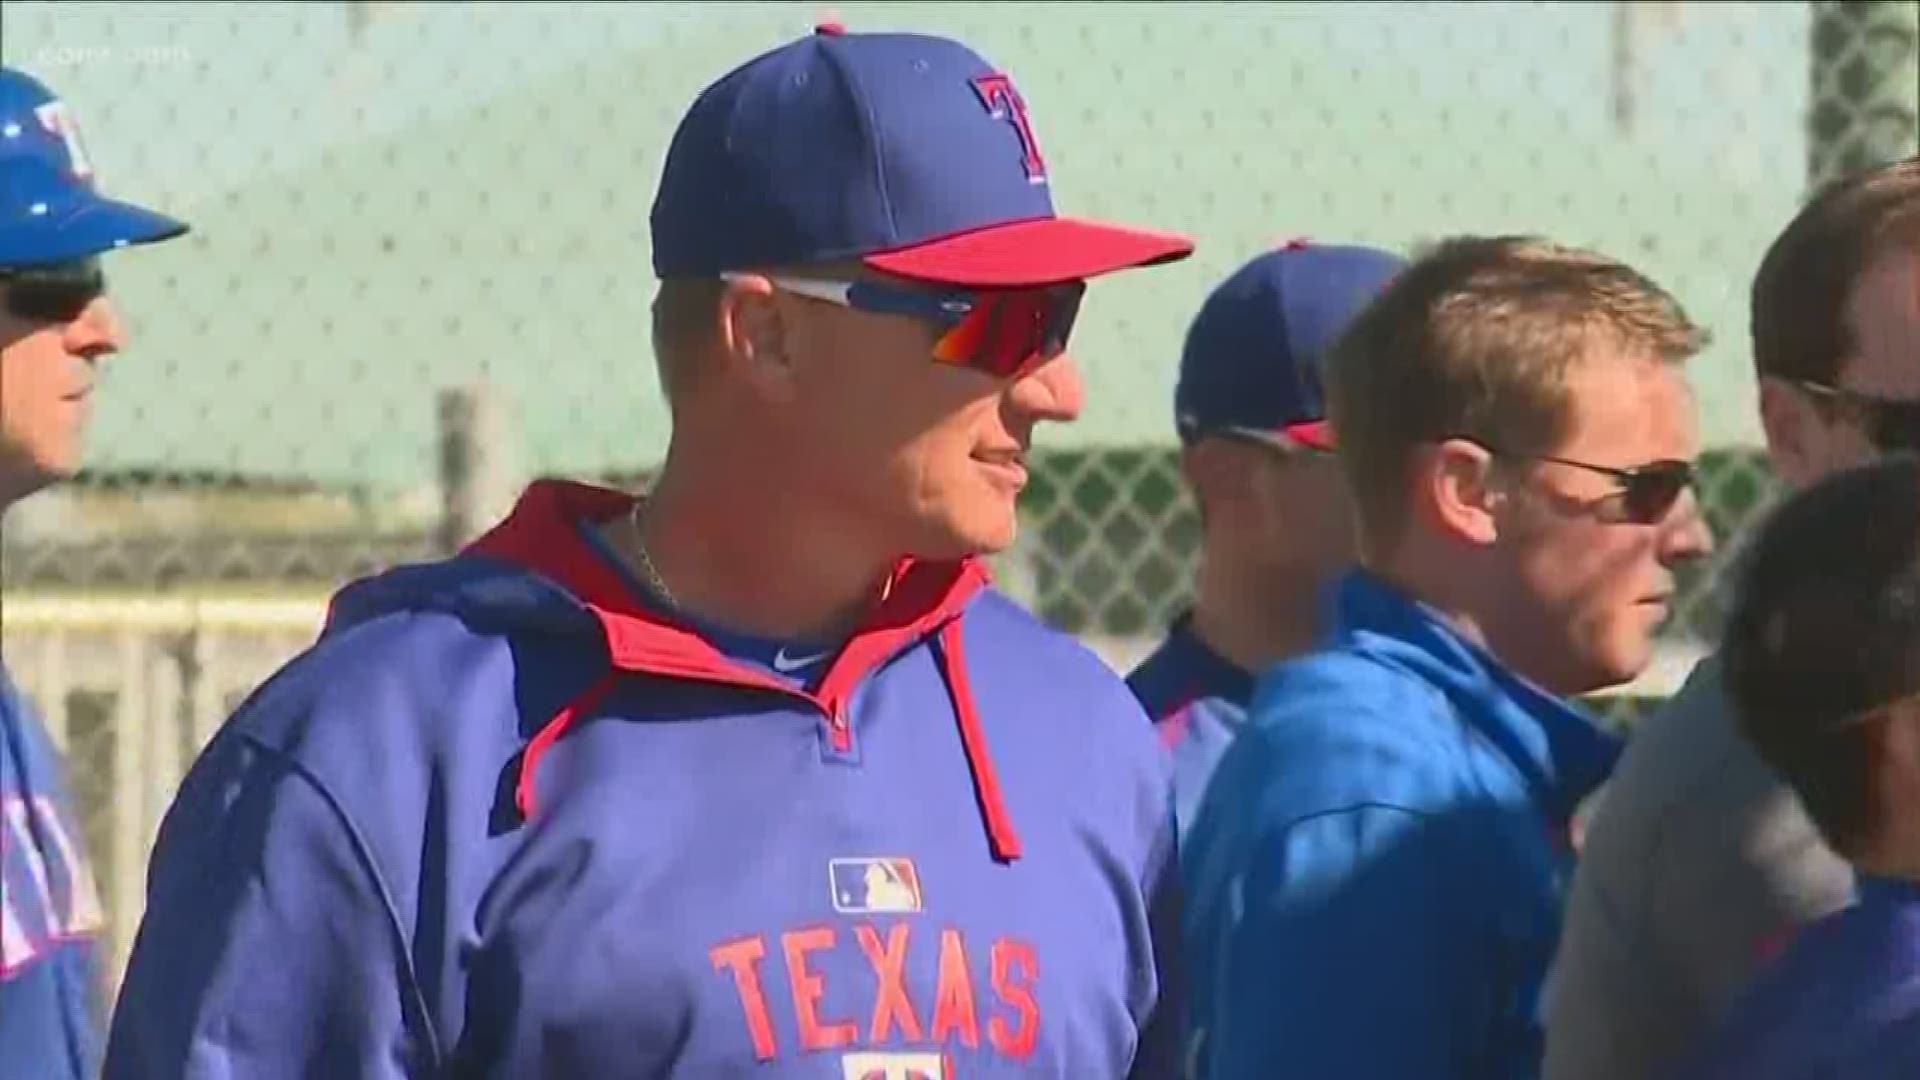 Rangers manager Jeff Banister talks about implementing changes in his leadership style this season.